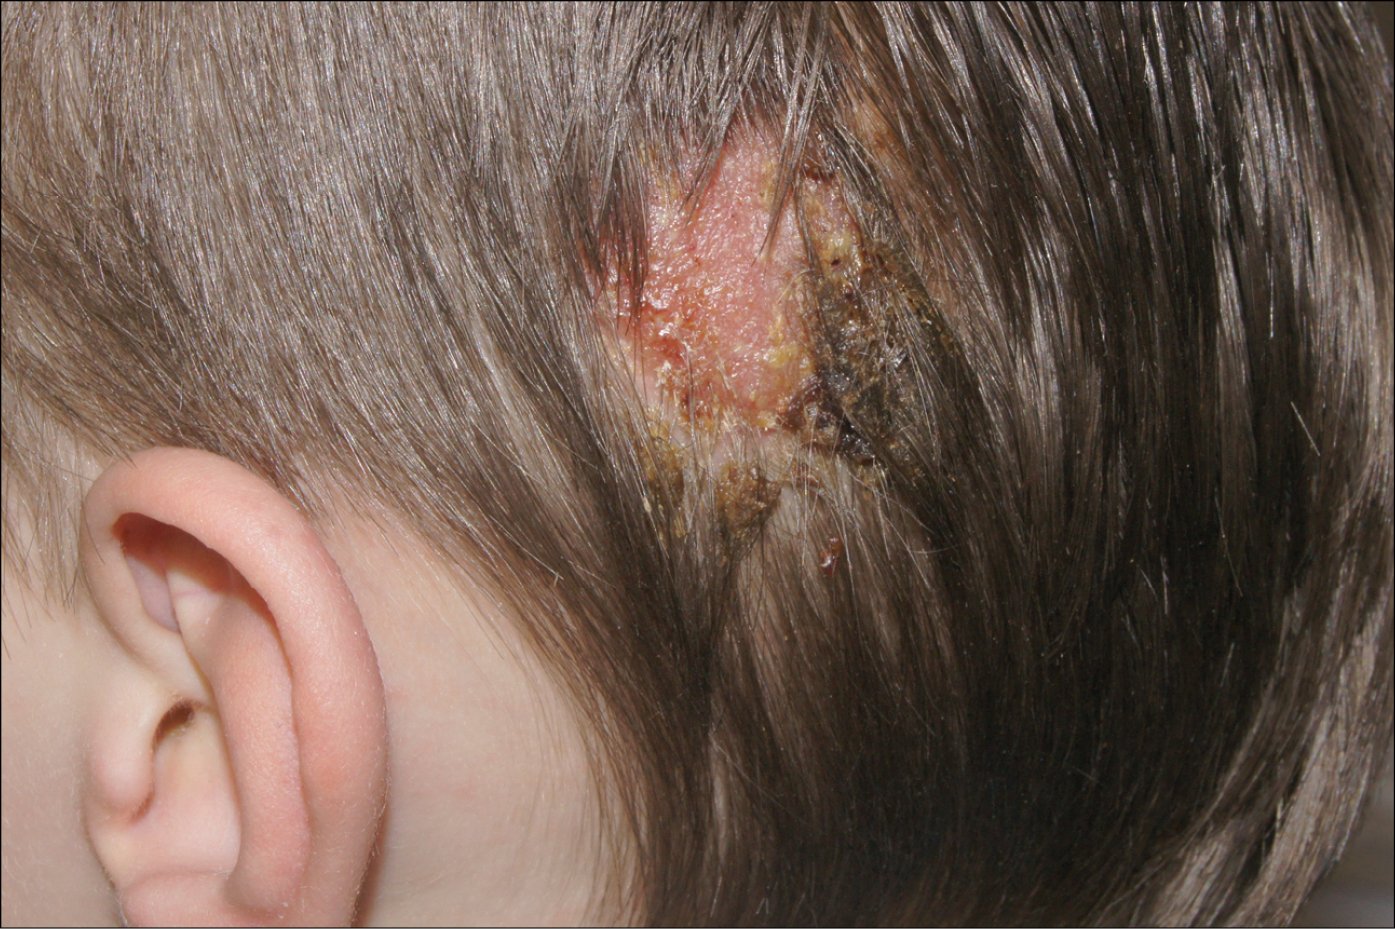 Figure 031_5902. Tinea capitis with a significant inflammatory